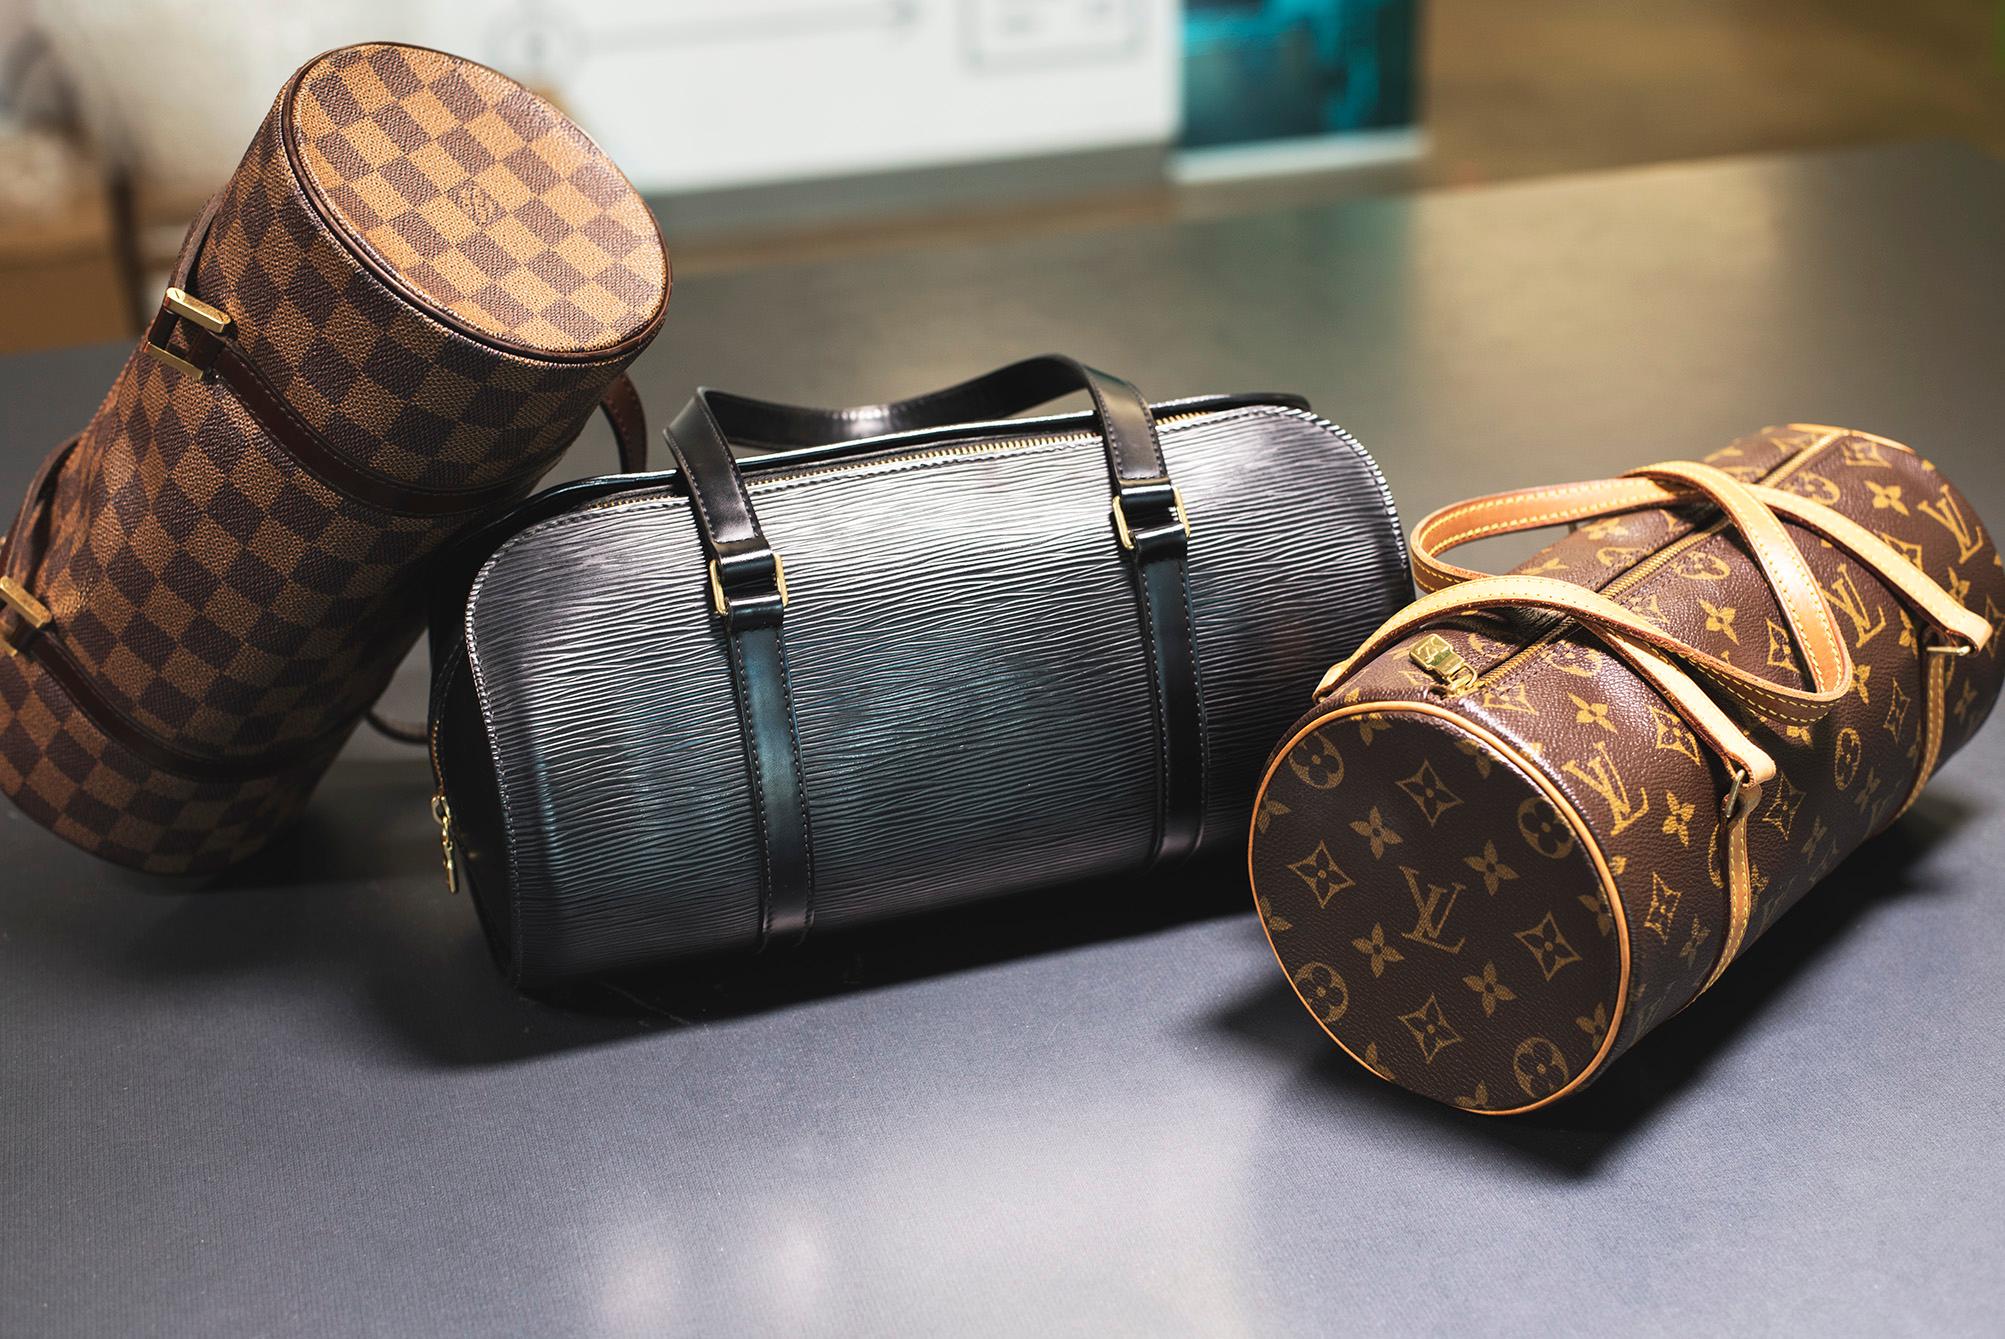 Here's Everything You Need To Know About The Louis Vuitton Duffle